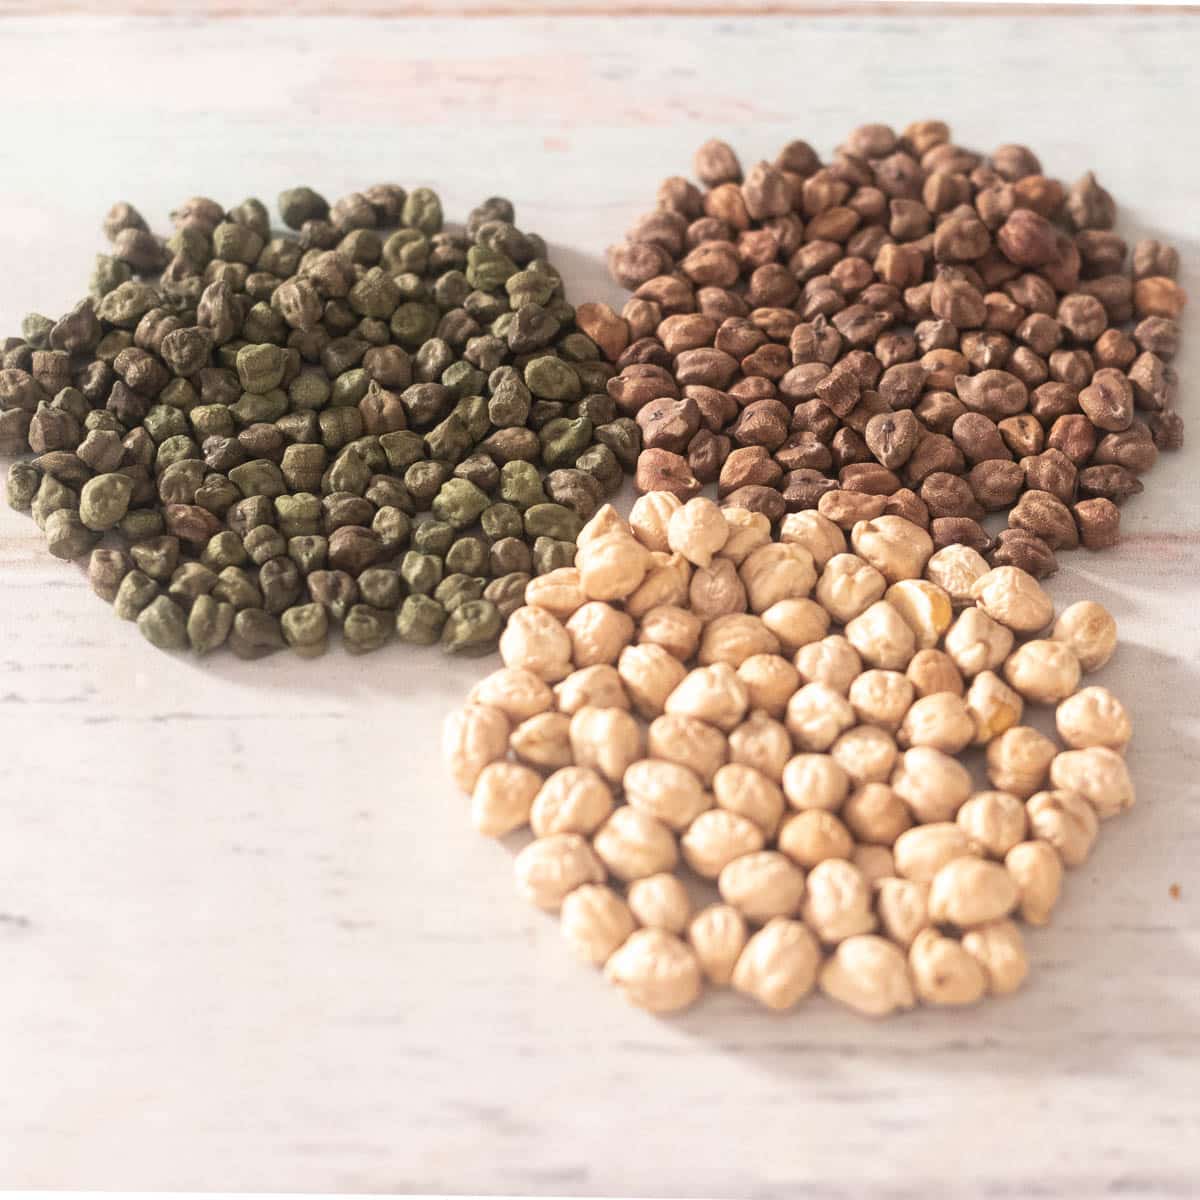 3 different types of chickpeas